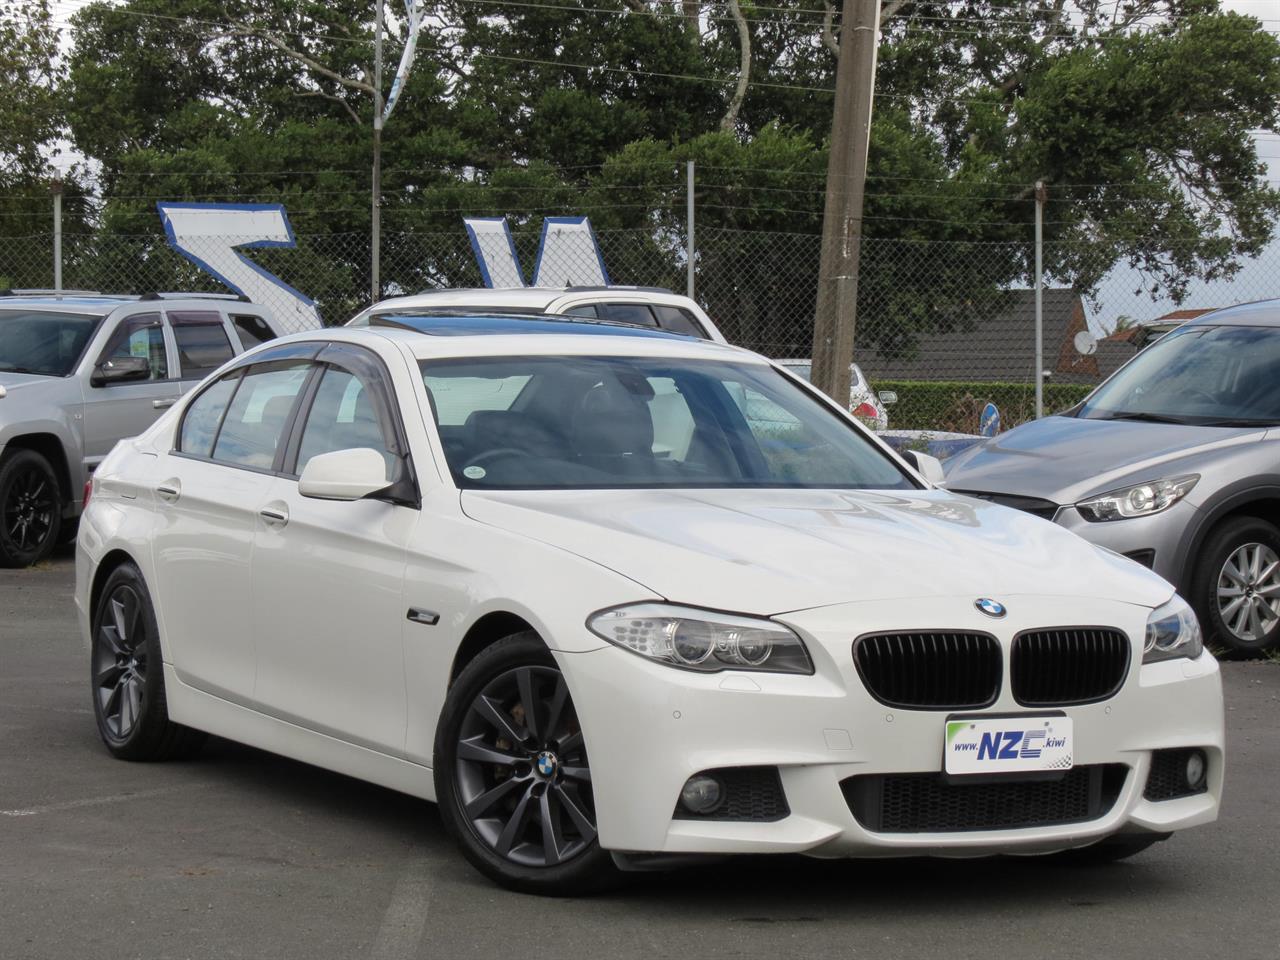 NZC 2010 BMW 535i just arrived to Auckland